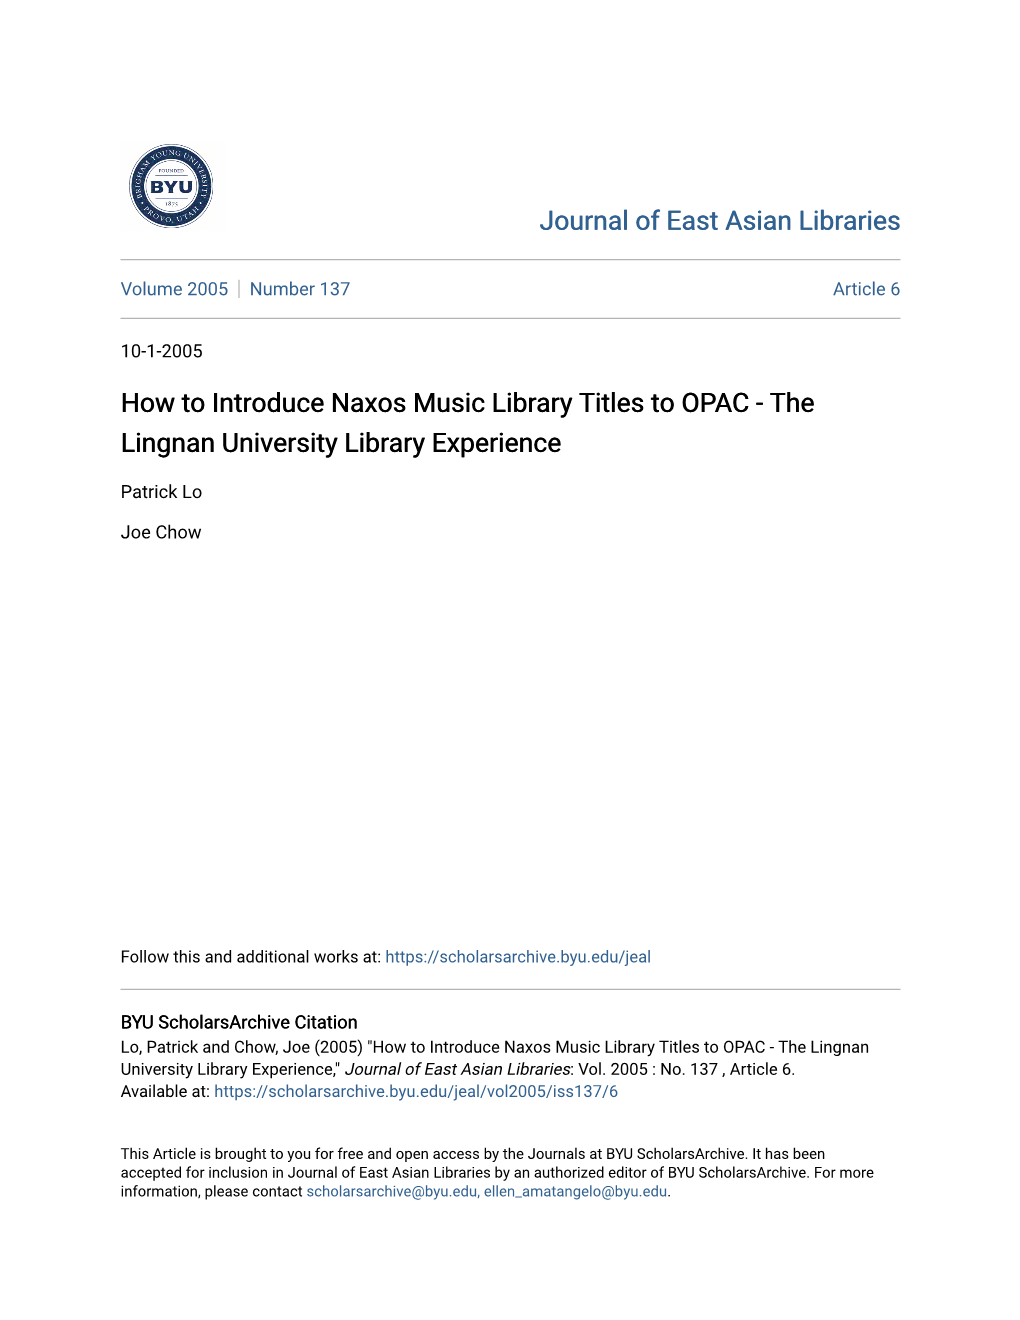 How to Introduce Naxos Music Library Titles to OPAC - the Lingnan University Library Experience